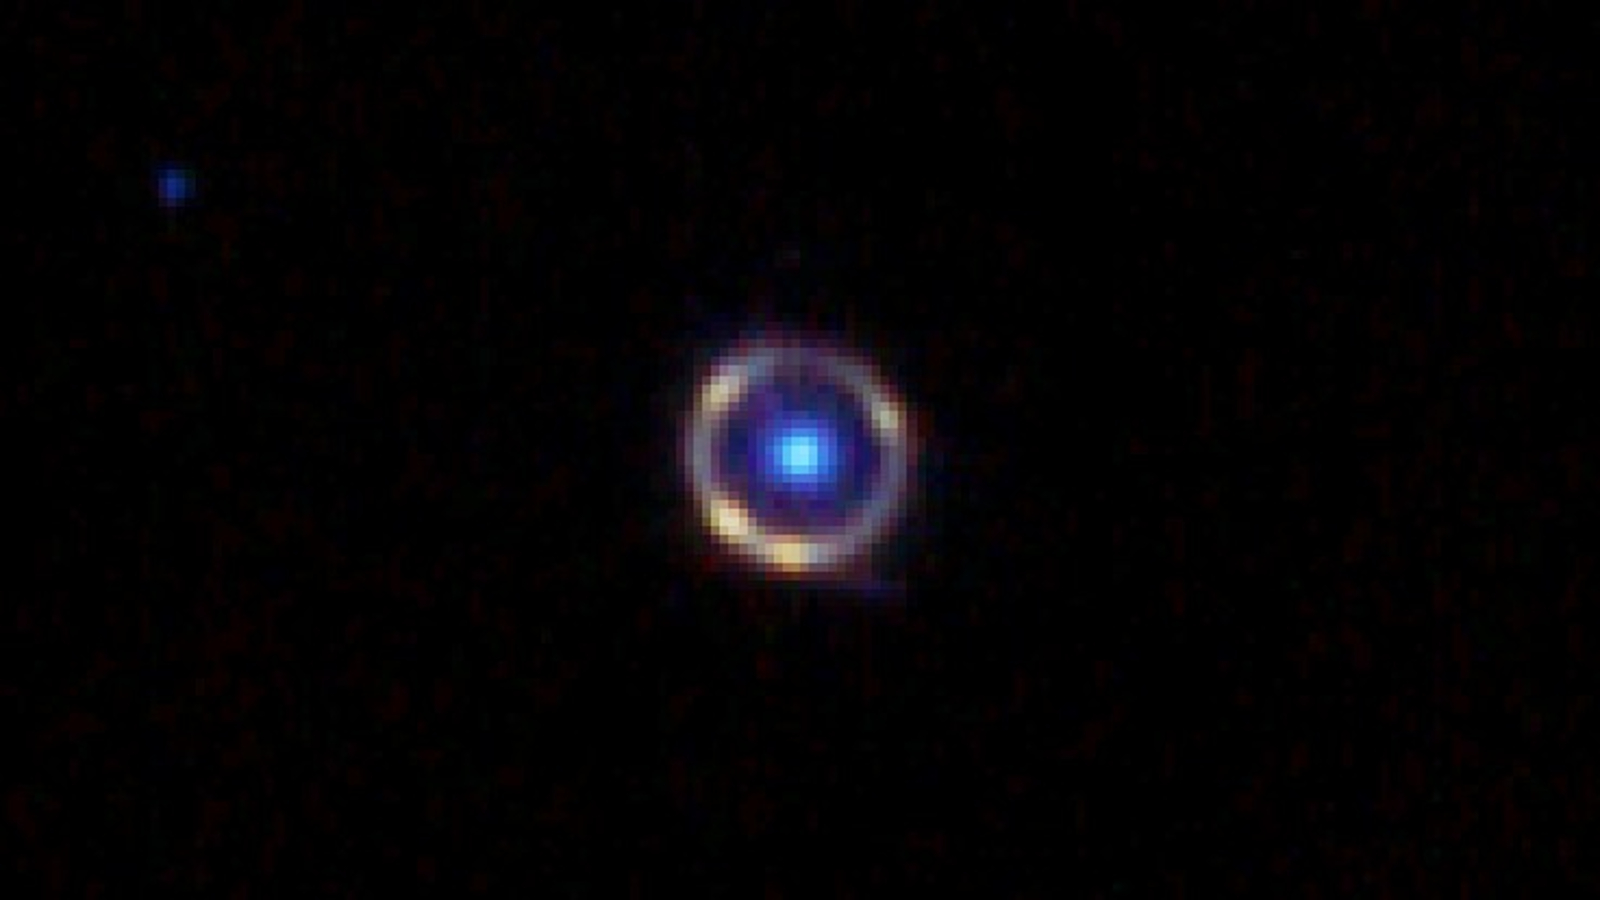 JO418 A close-up view of the Einstein ring.